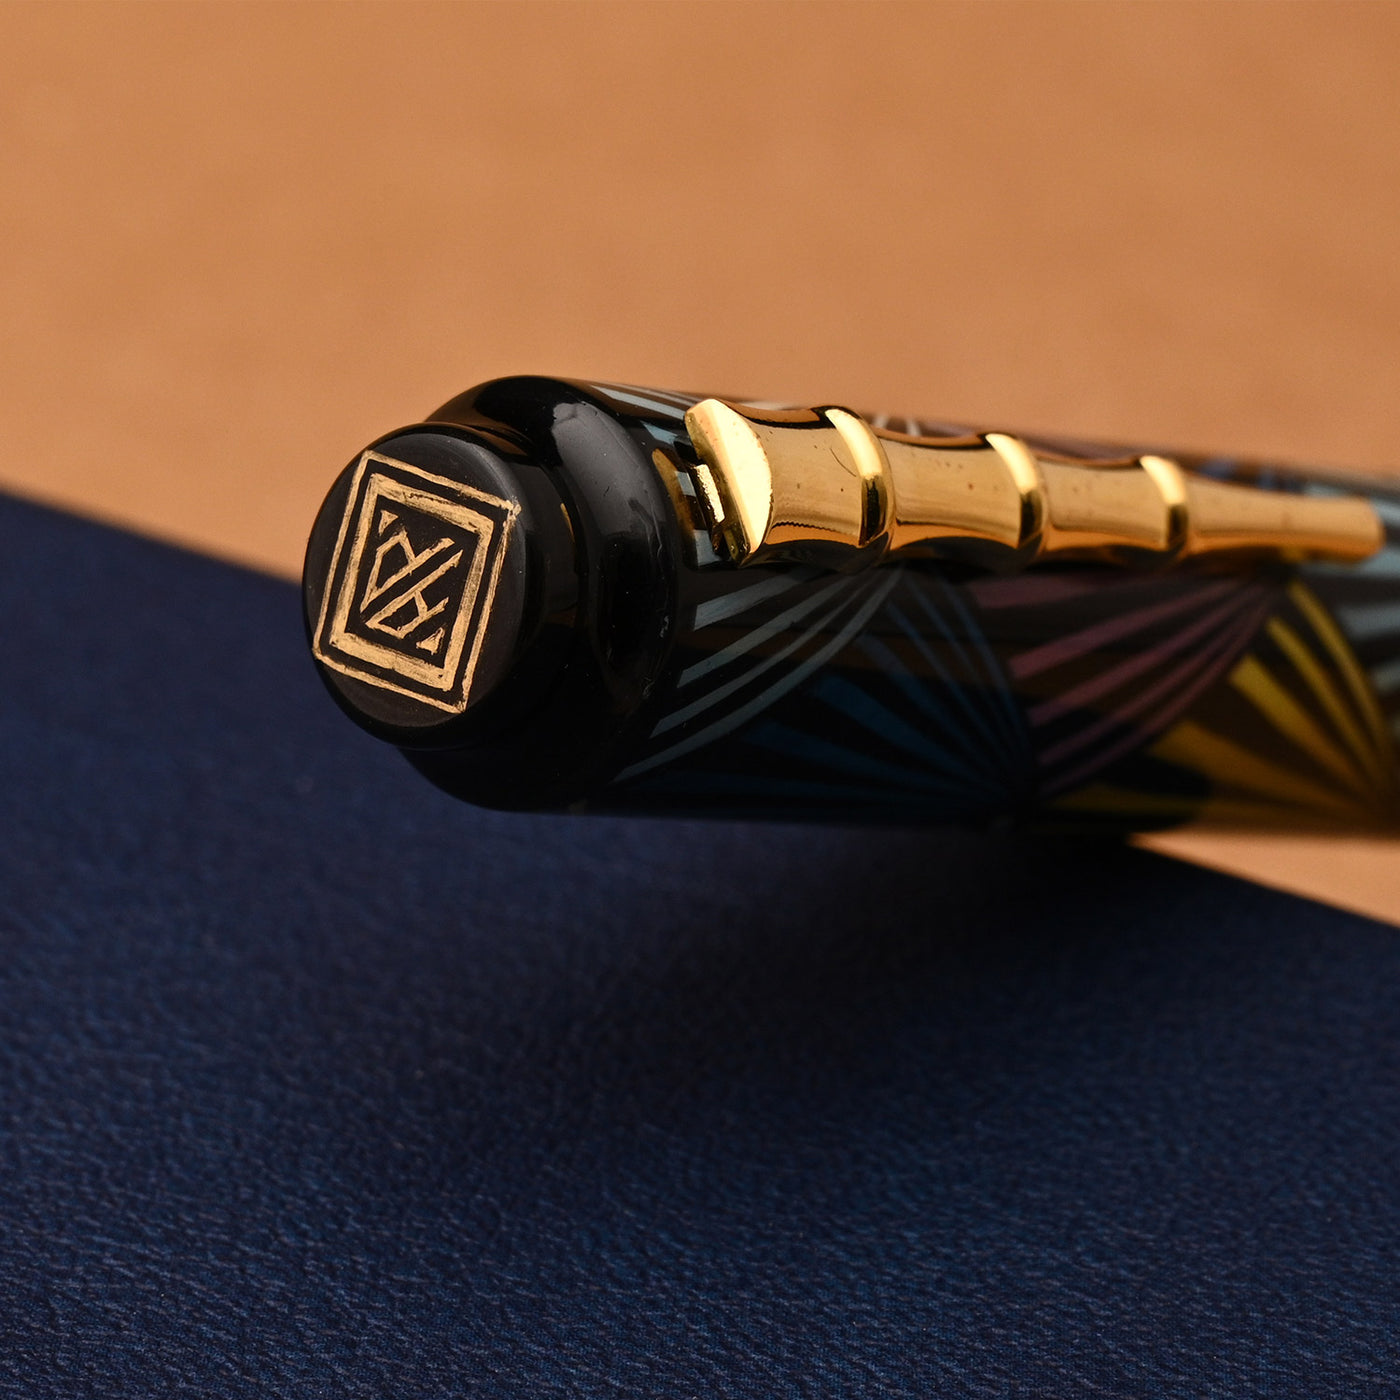 AP Limited Editions Russian Lacquer Art Fountain Pen - An Ode to Art Deco 8